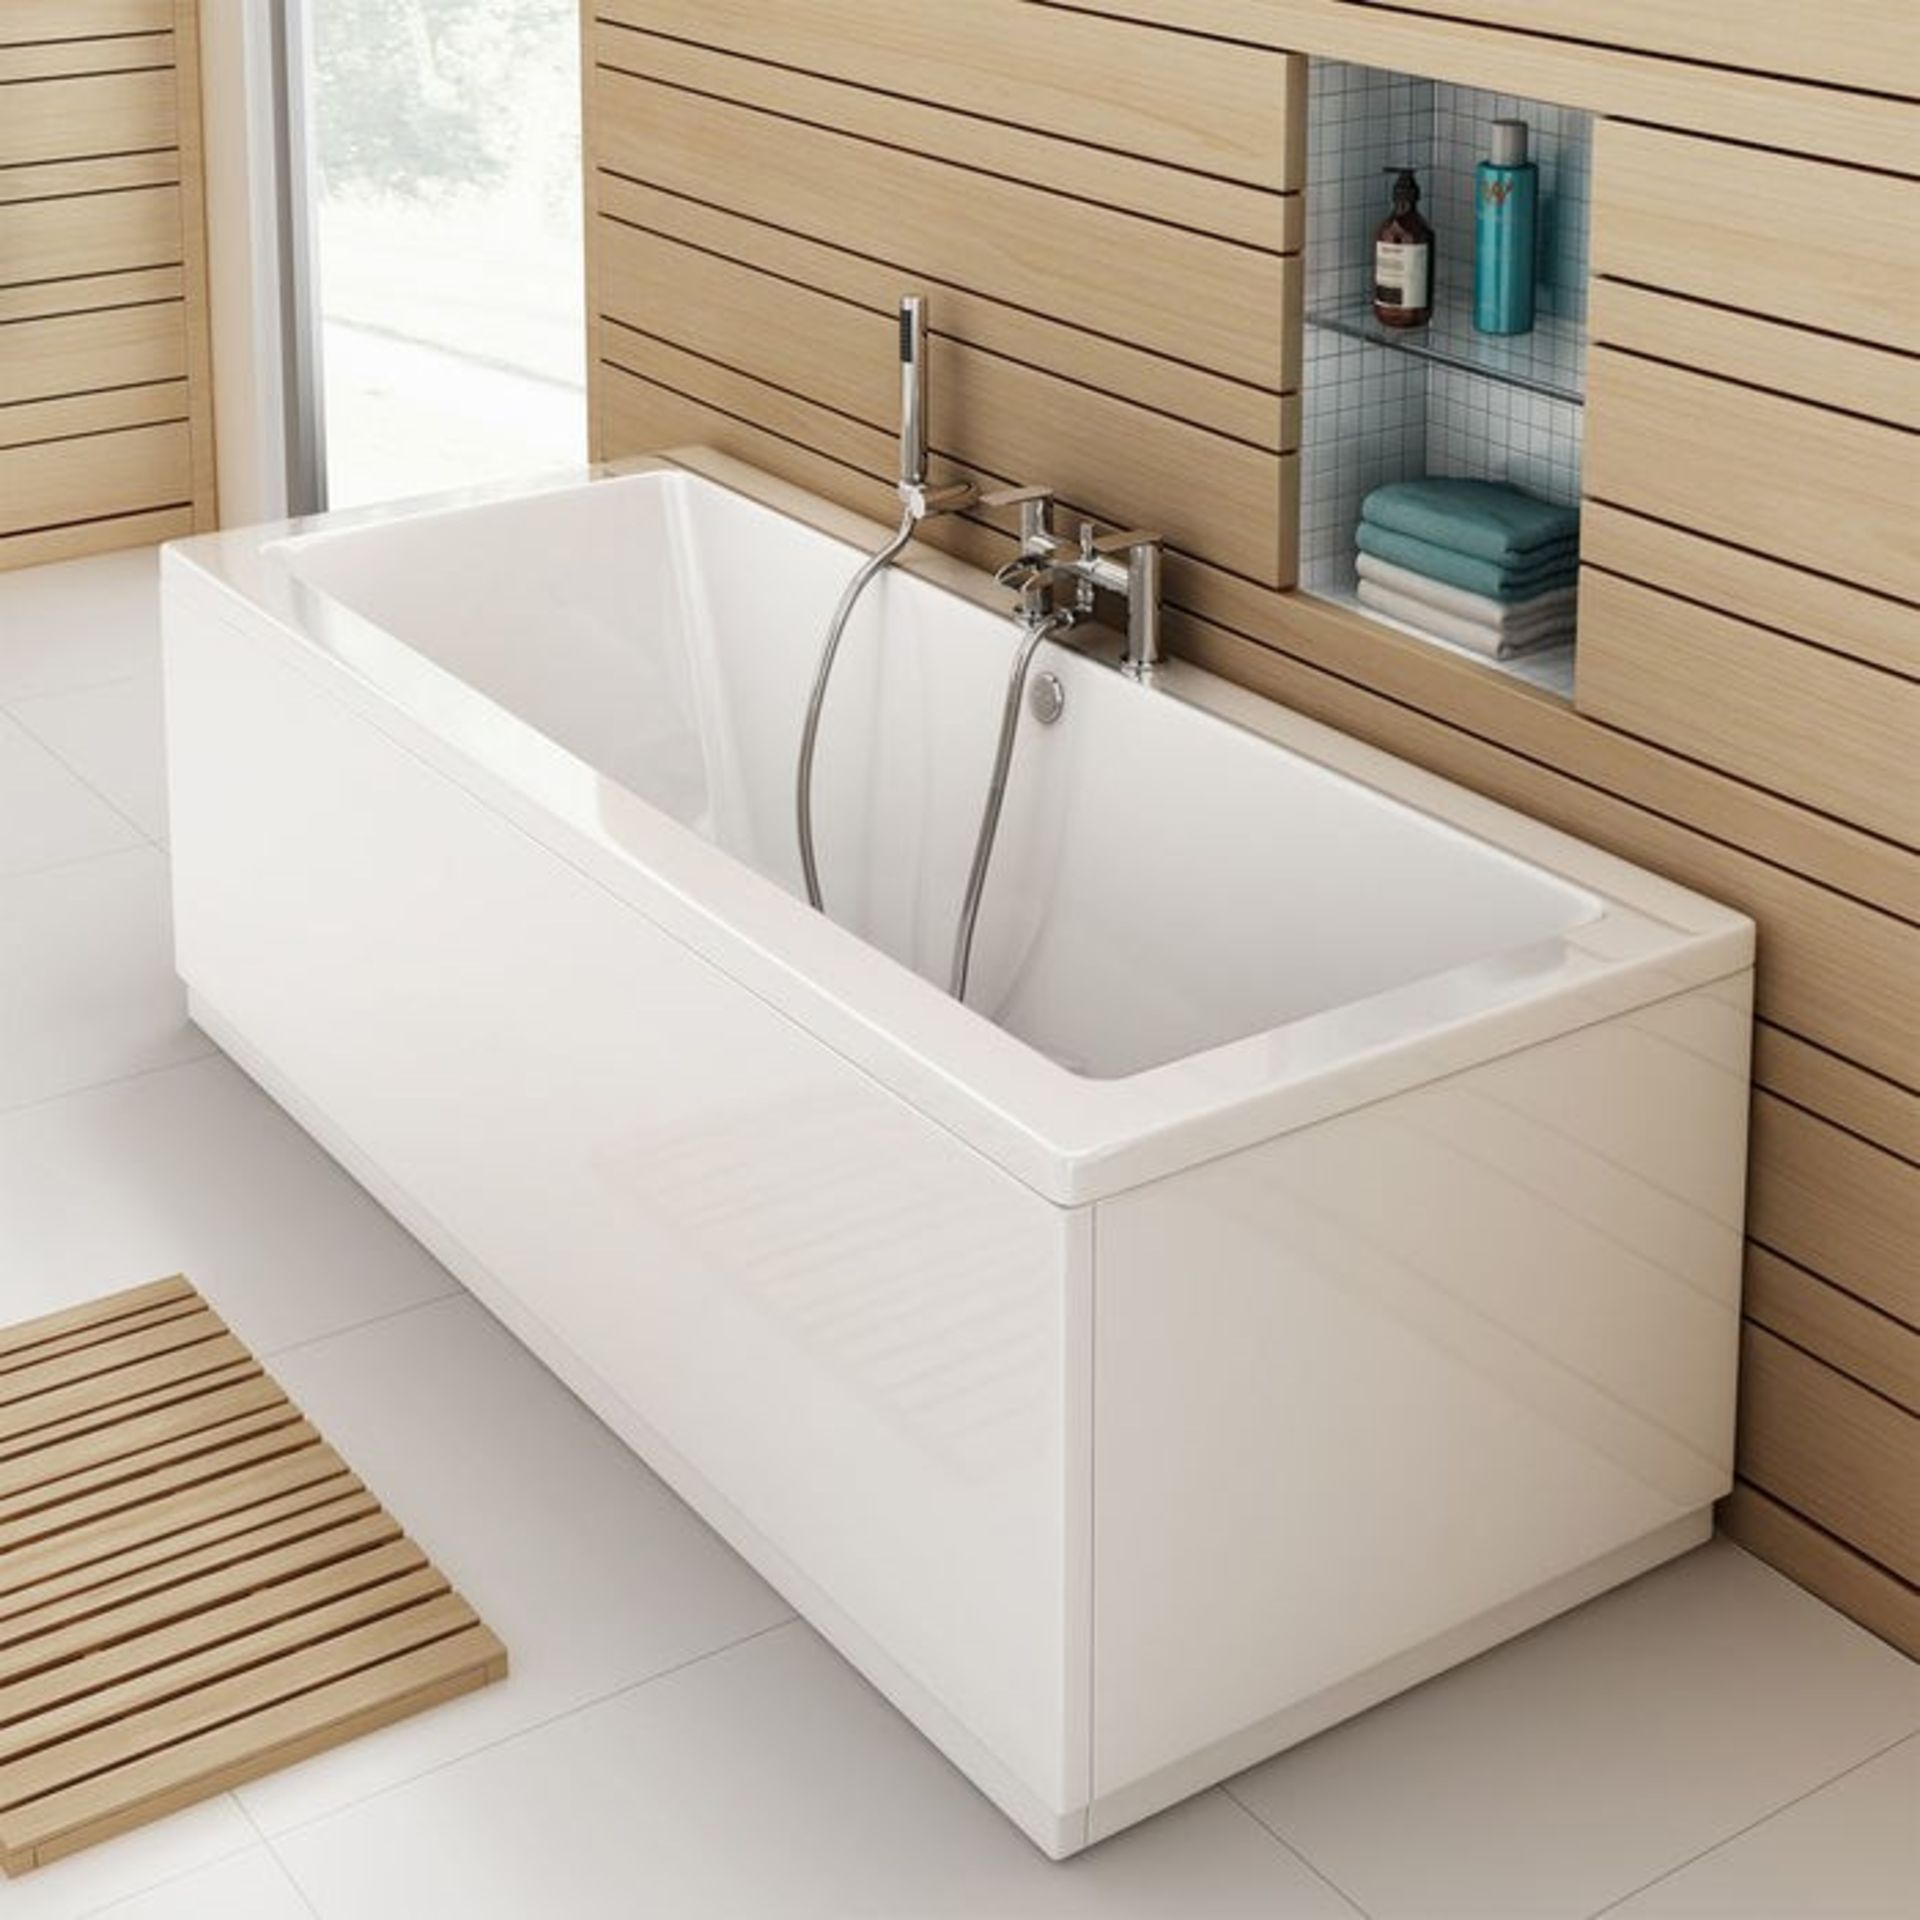 (RR19) 1700 X 750MM Square Double Ended Bath. We love this bath because it is perfect for